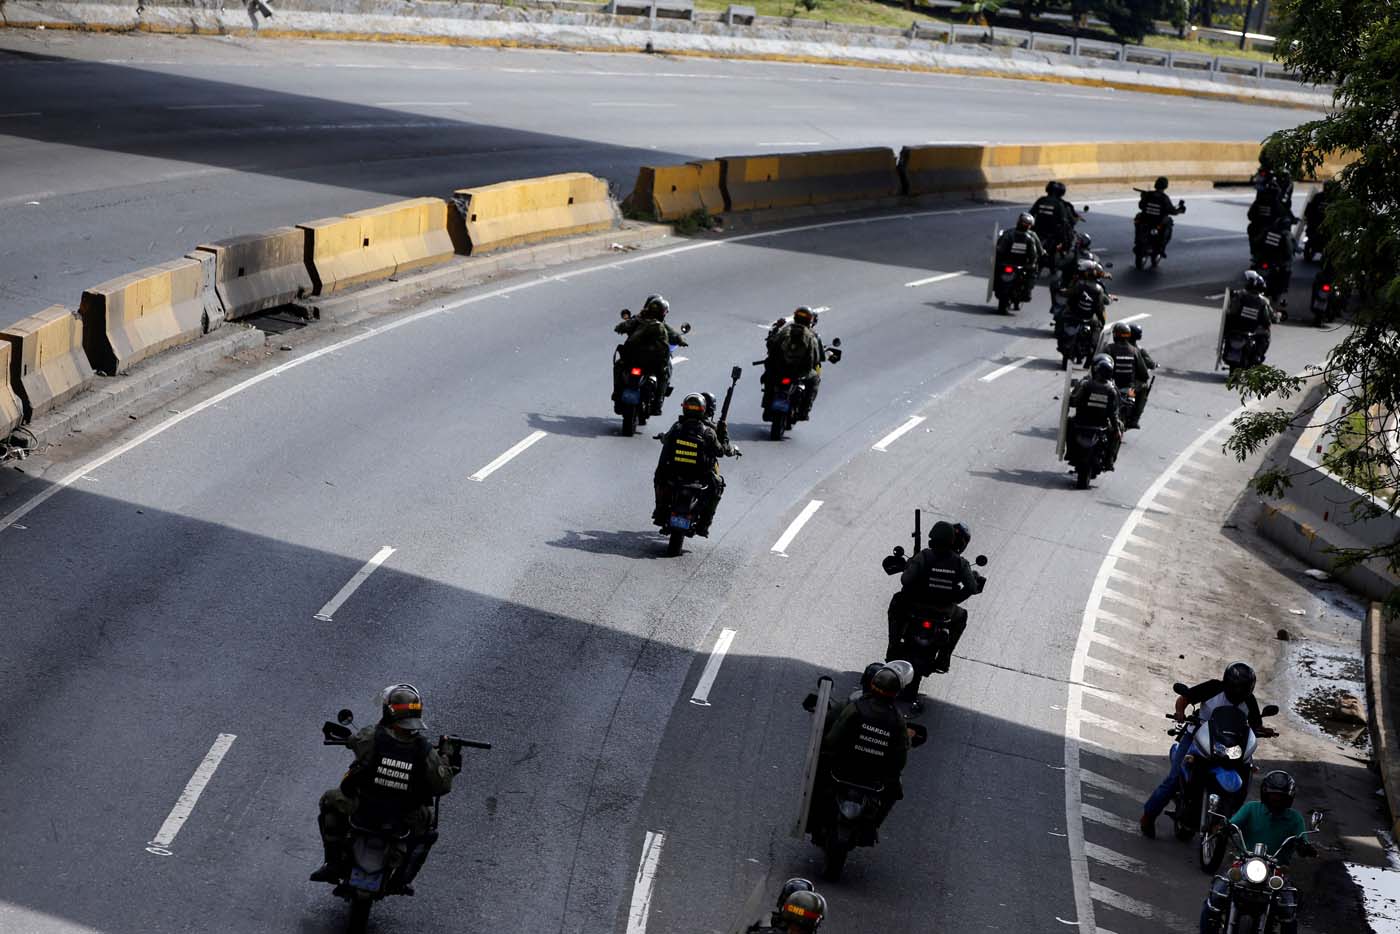 Members of security forces ride their motorcycles during a rally against Venezuelan President Nicolas Maduro's government in Caracas, Venezuela, July 6, 2017. REUTERS/Andres Martinez Casares